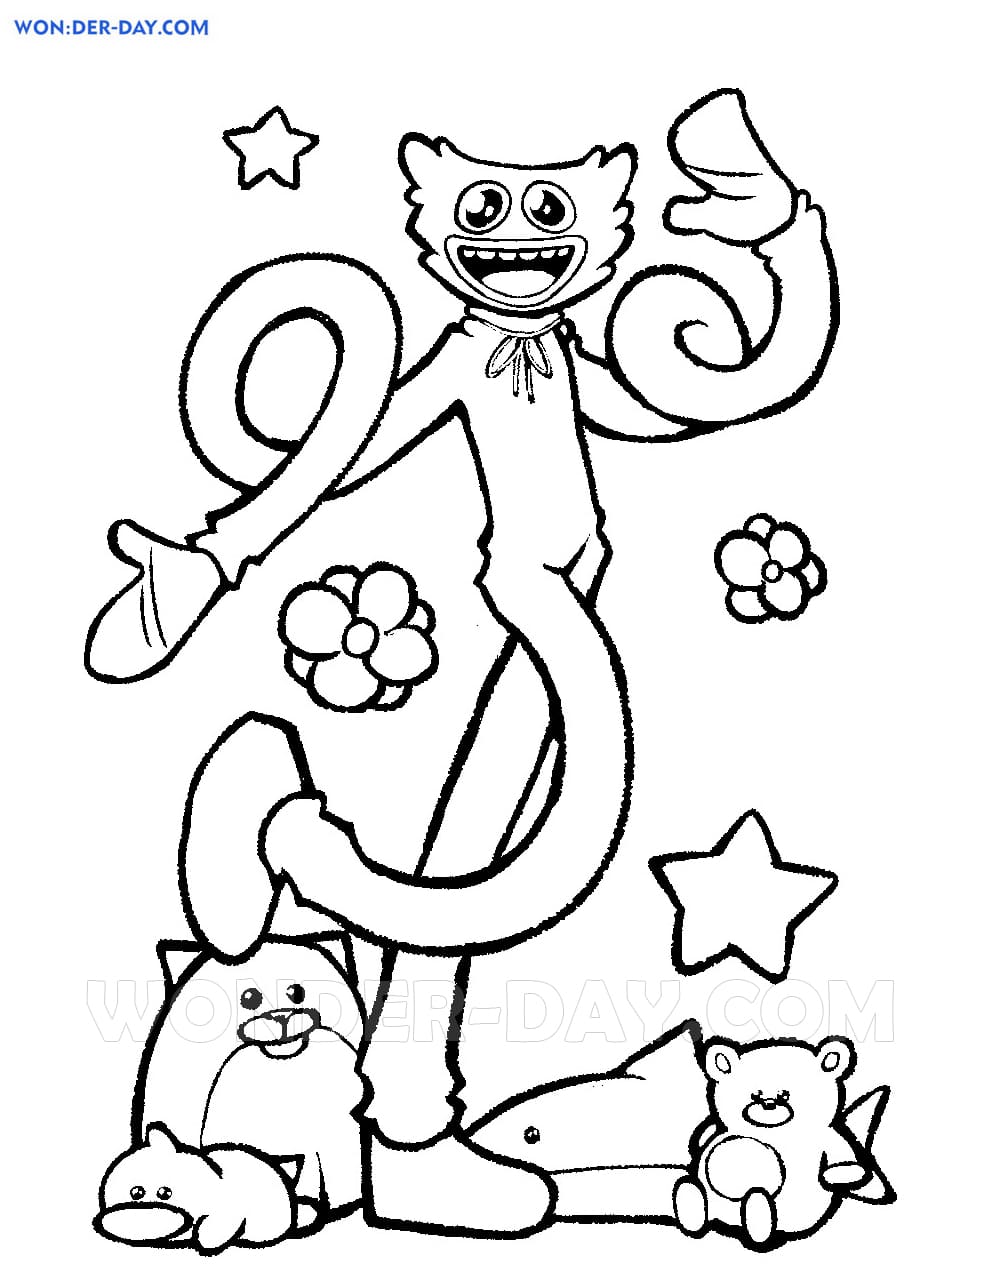 Huggy Wuggy Coloring Pages   Printable Coloring Pages   Coloring Home